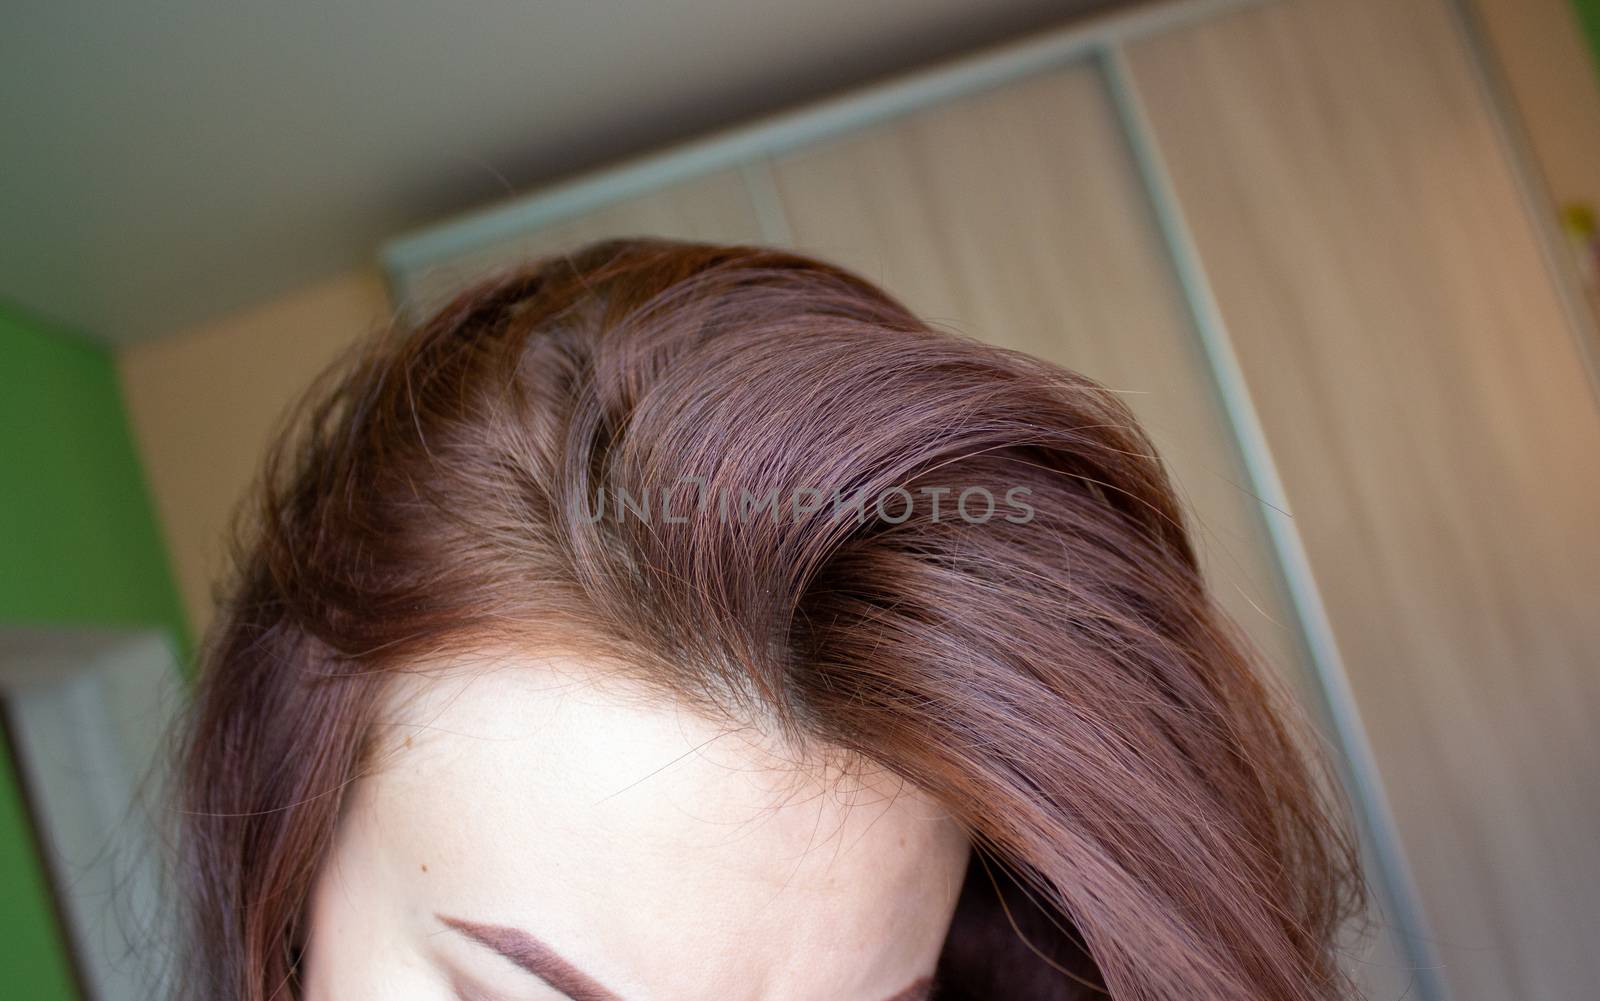 hair on a woman's head close-up. Hair brown color of